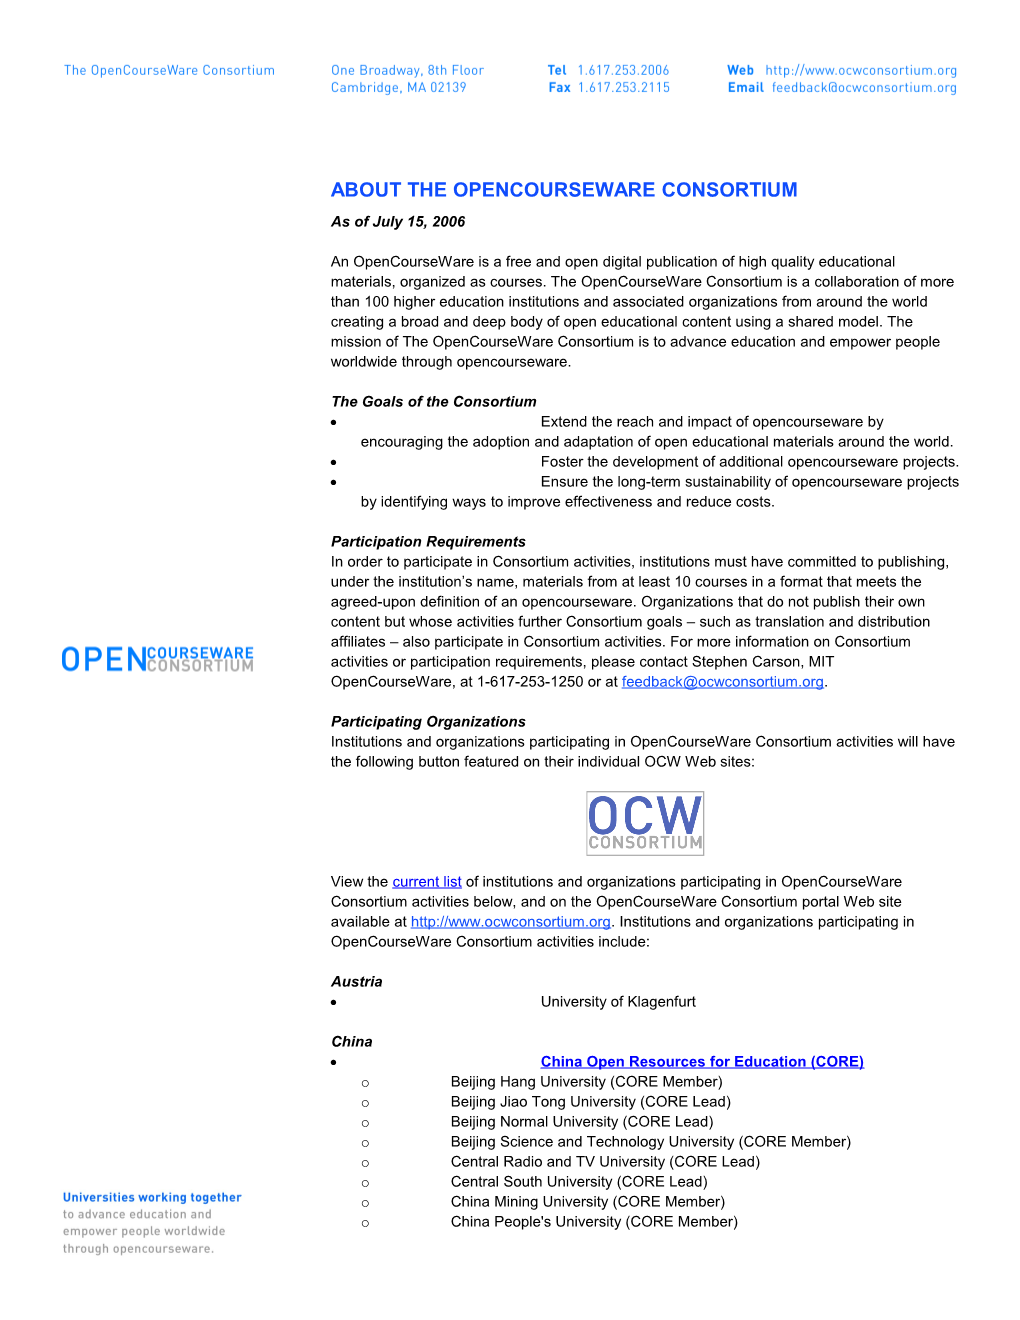 About the Opencourseware Consortium